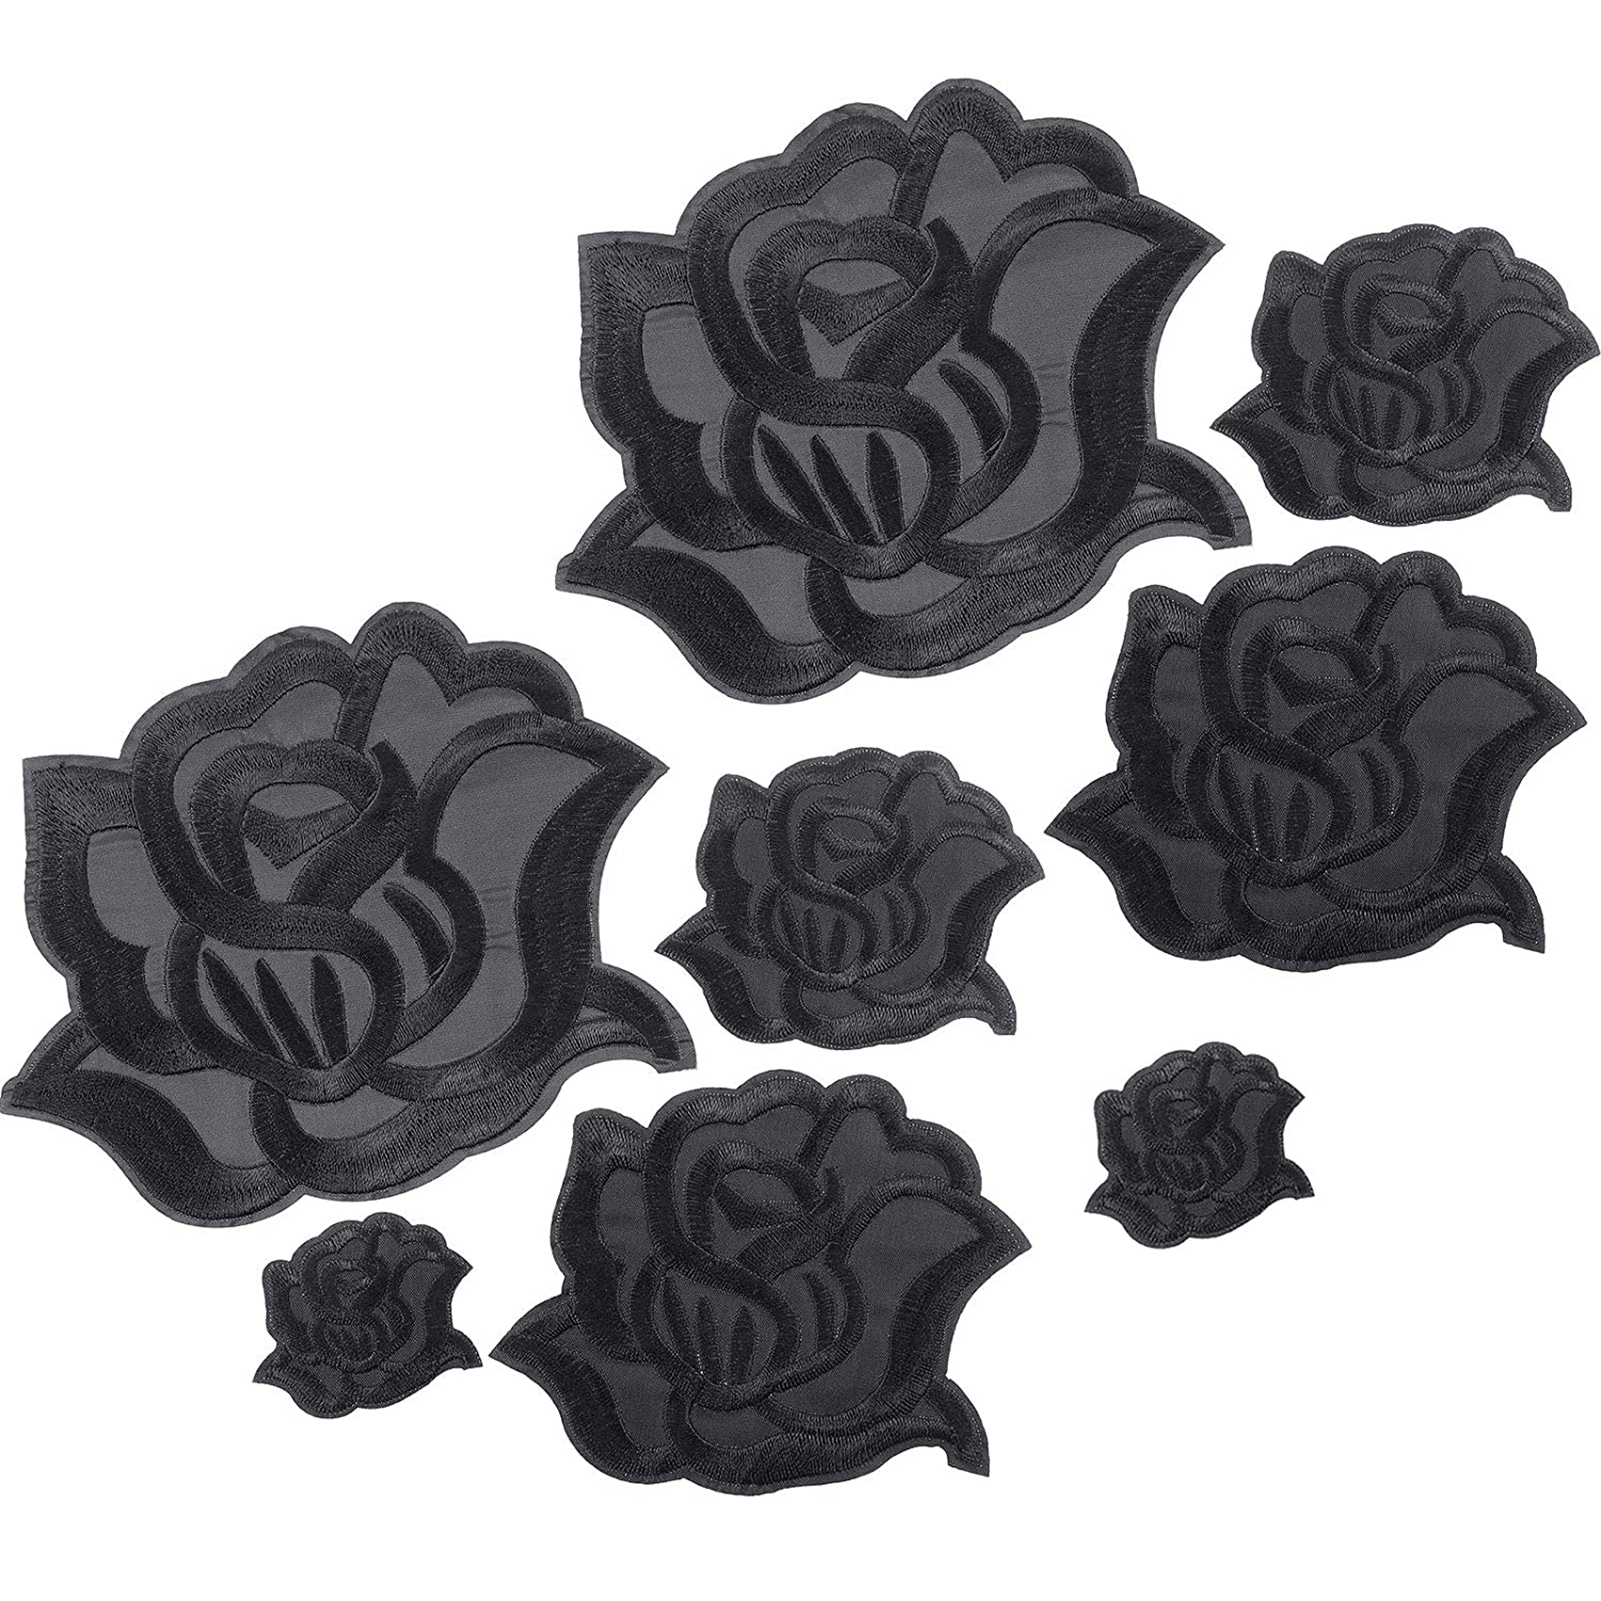 PWFE Black Rose Fabric Patches Rose Flower Repair Patches 4 Size Sew on or Iron  on Applique Patches for Jacket Jeans Clothes Hats Shoes Bags 